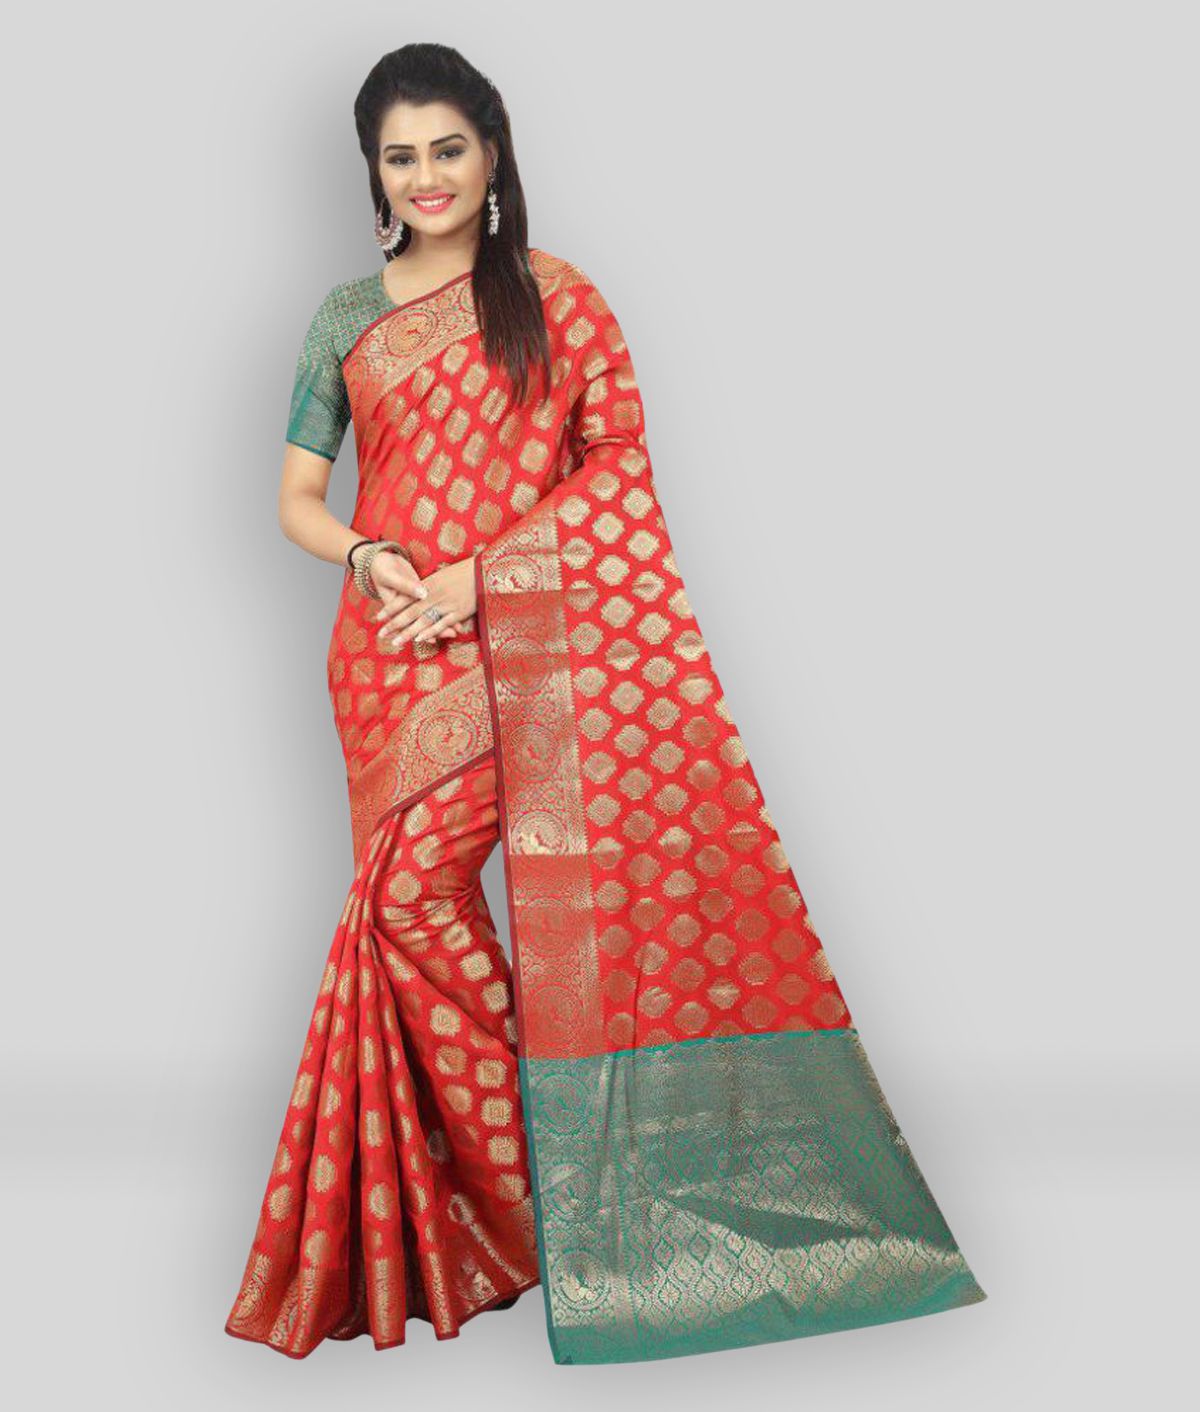     			Gazal Fashions - Red Silk Saree With Blouse Piece (Pack of 1)